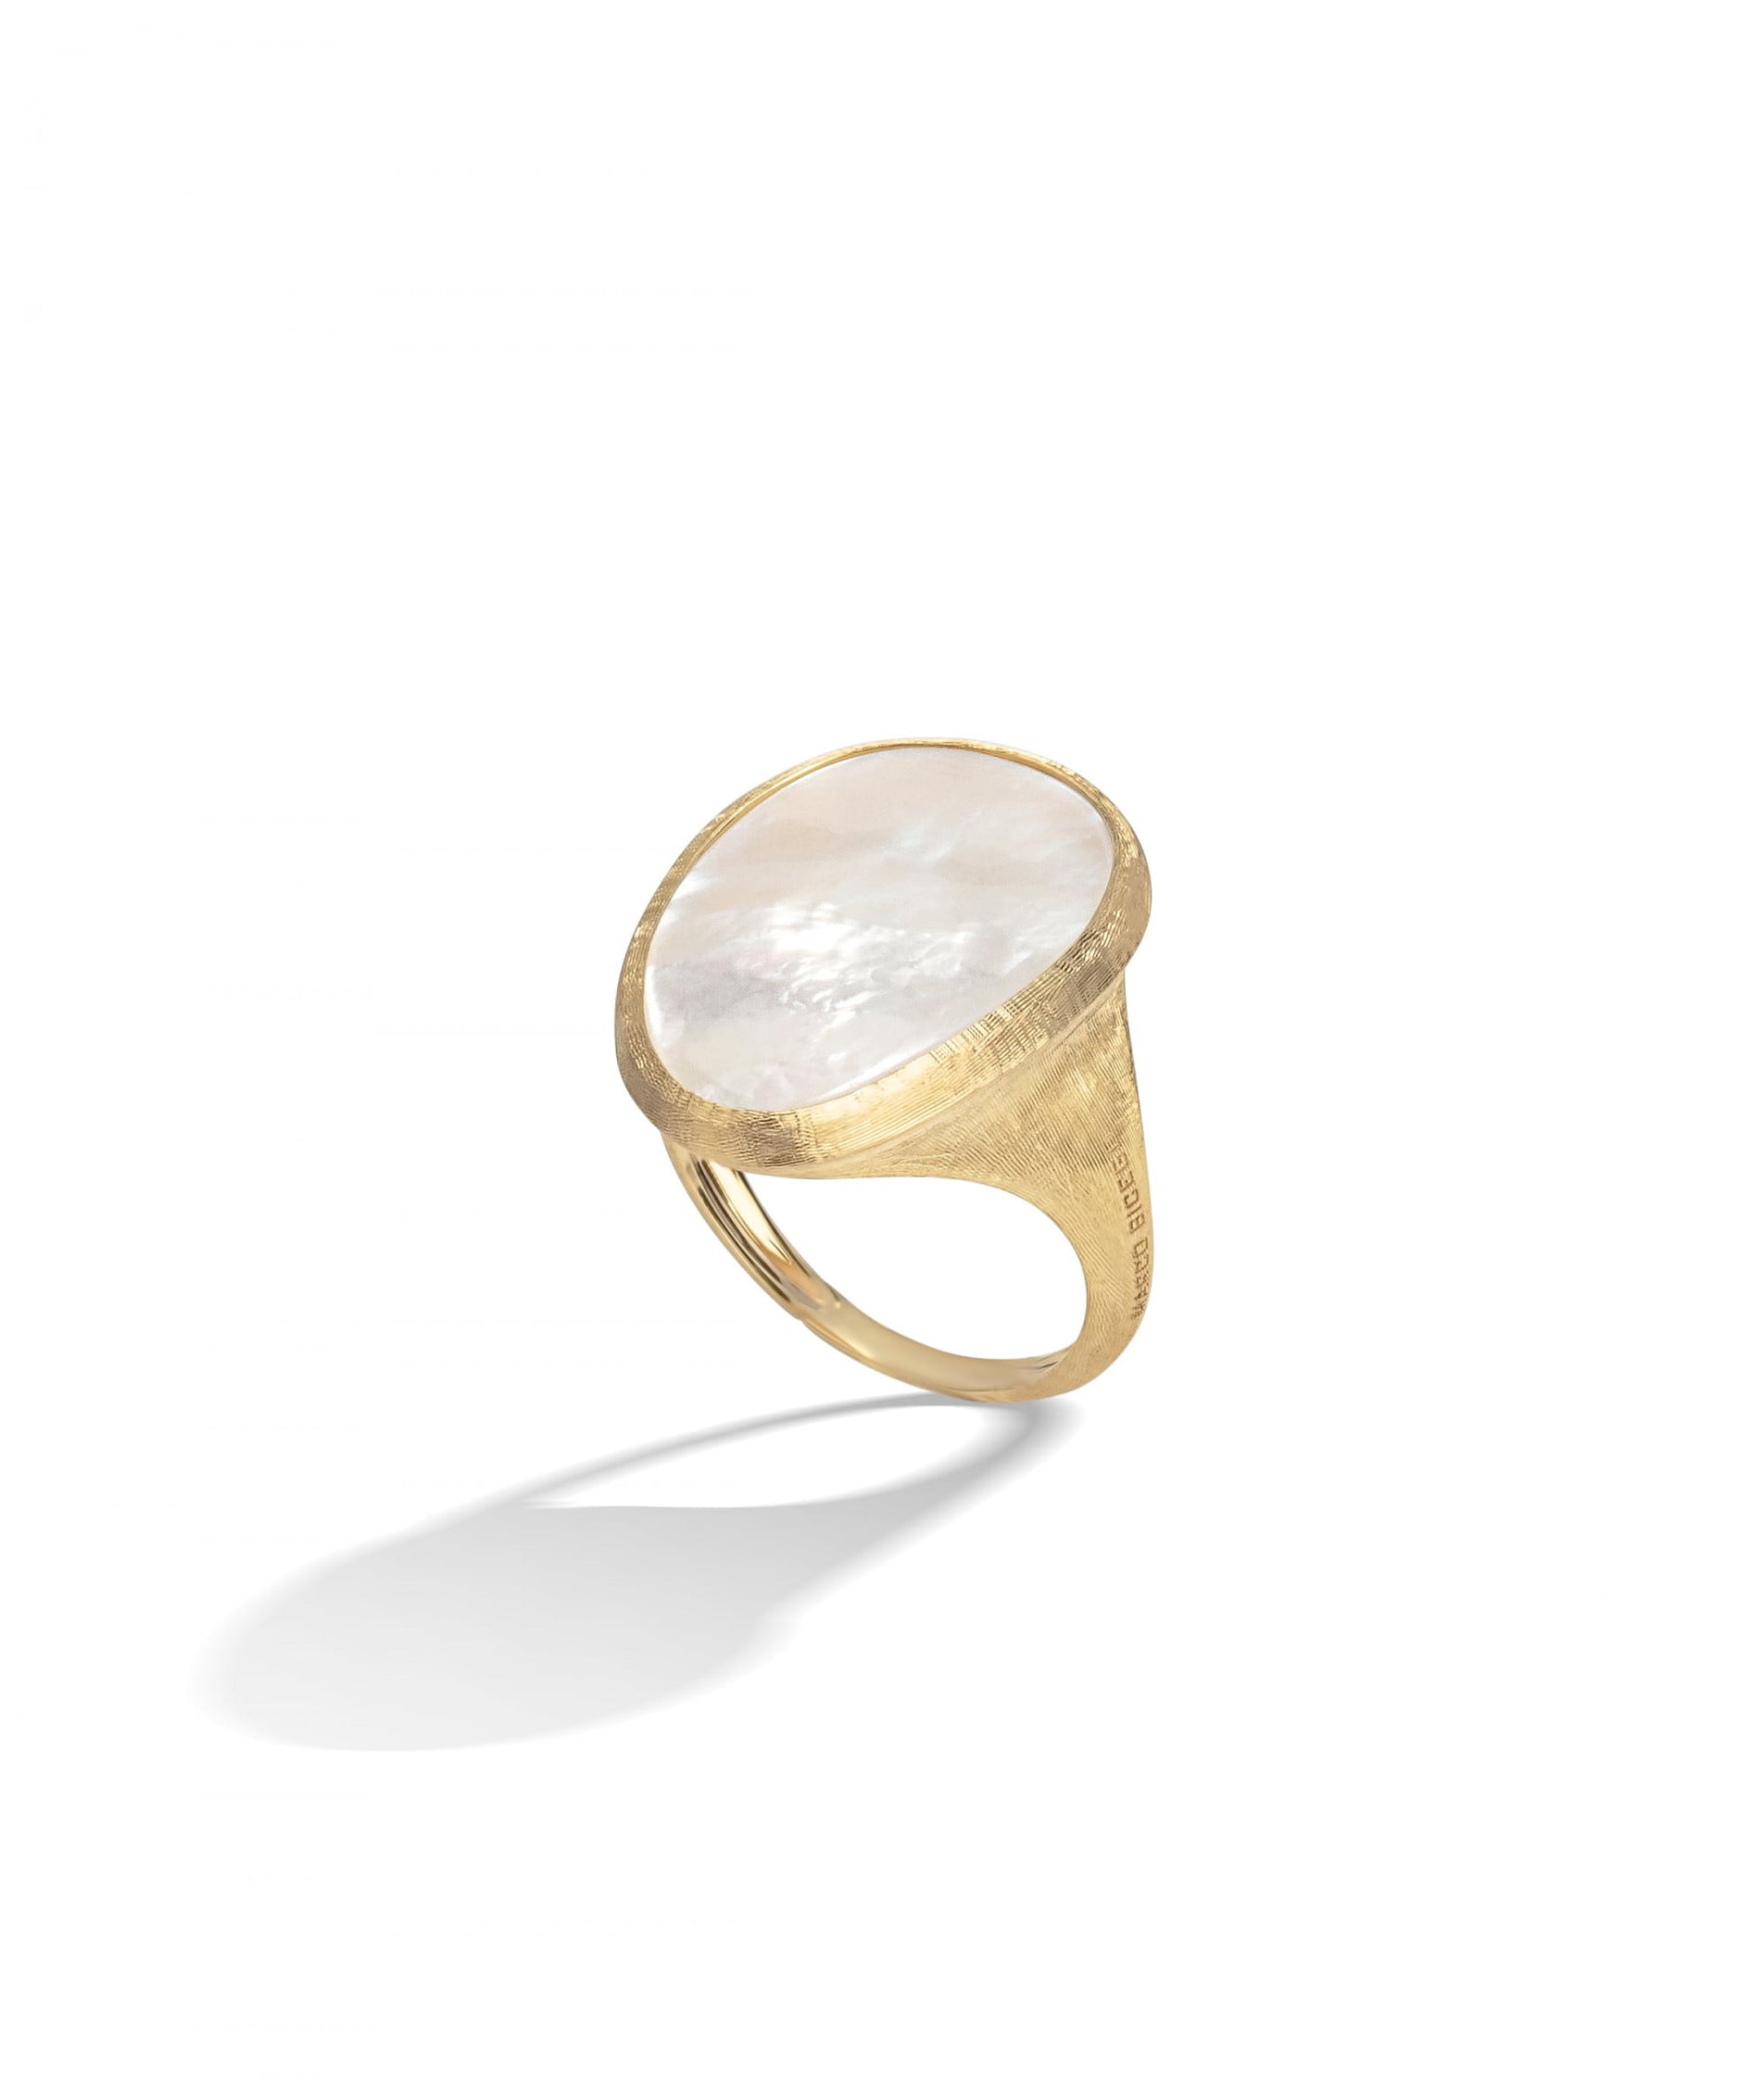 Lunaria Ring in 18k Yellow Gold with White Mother of Pearl Small - Orsini Jewellers NZ